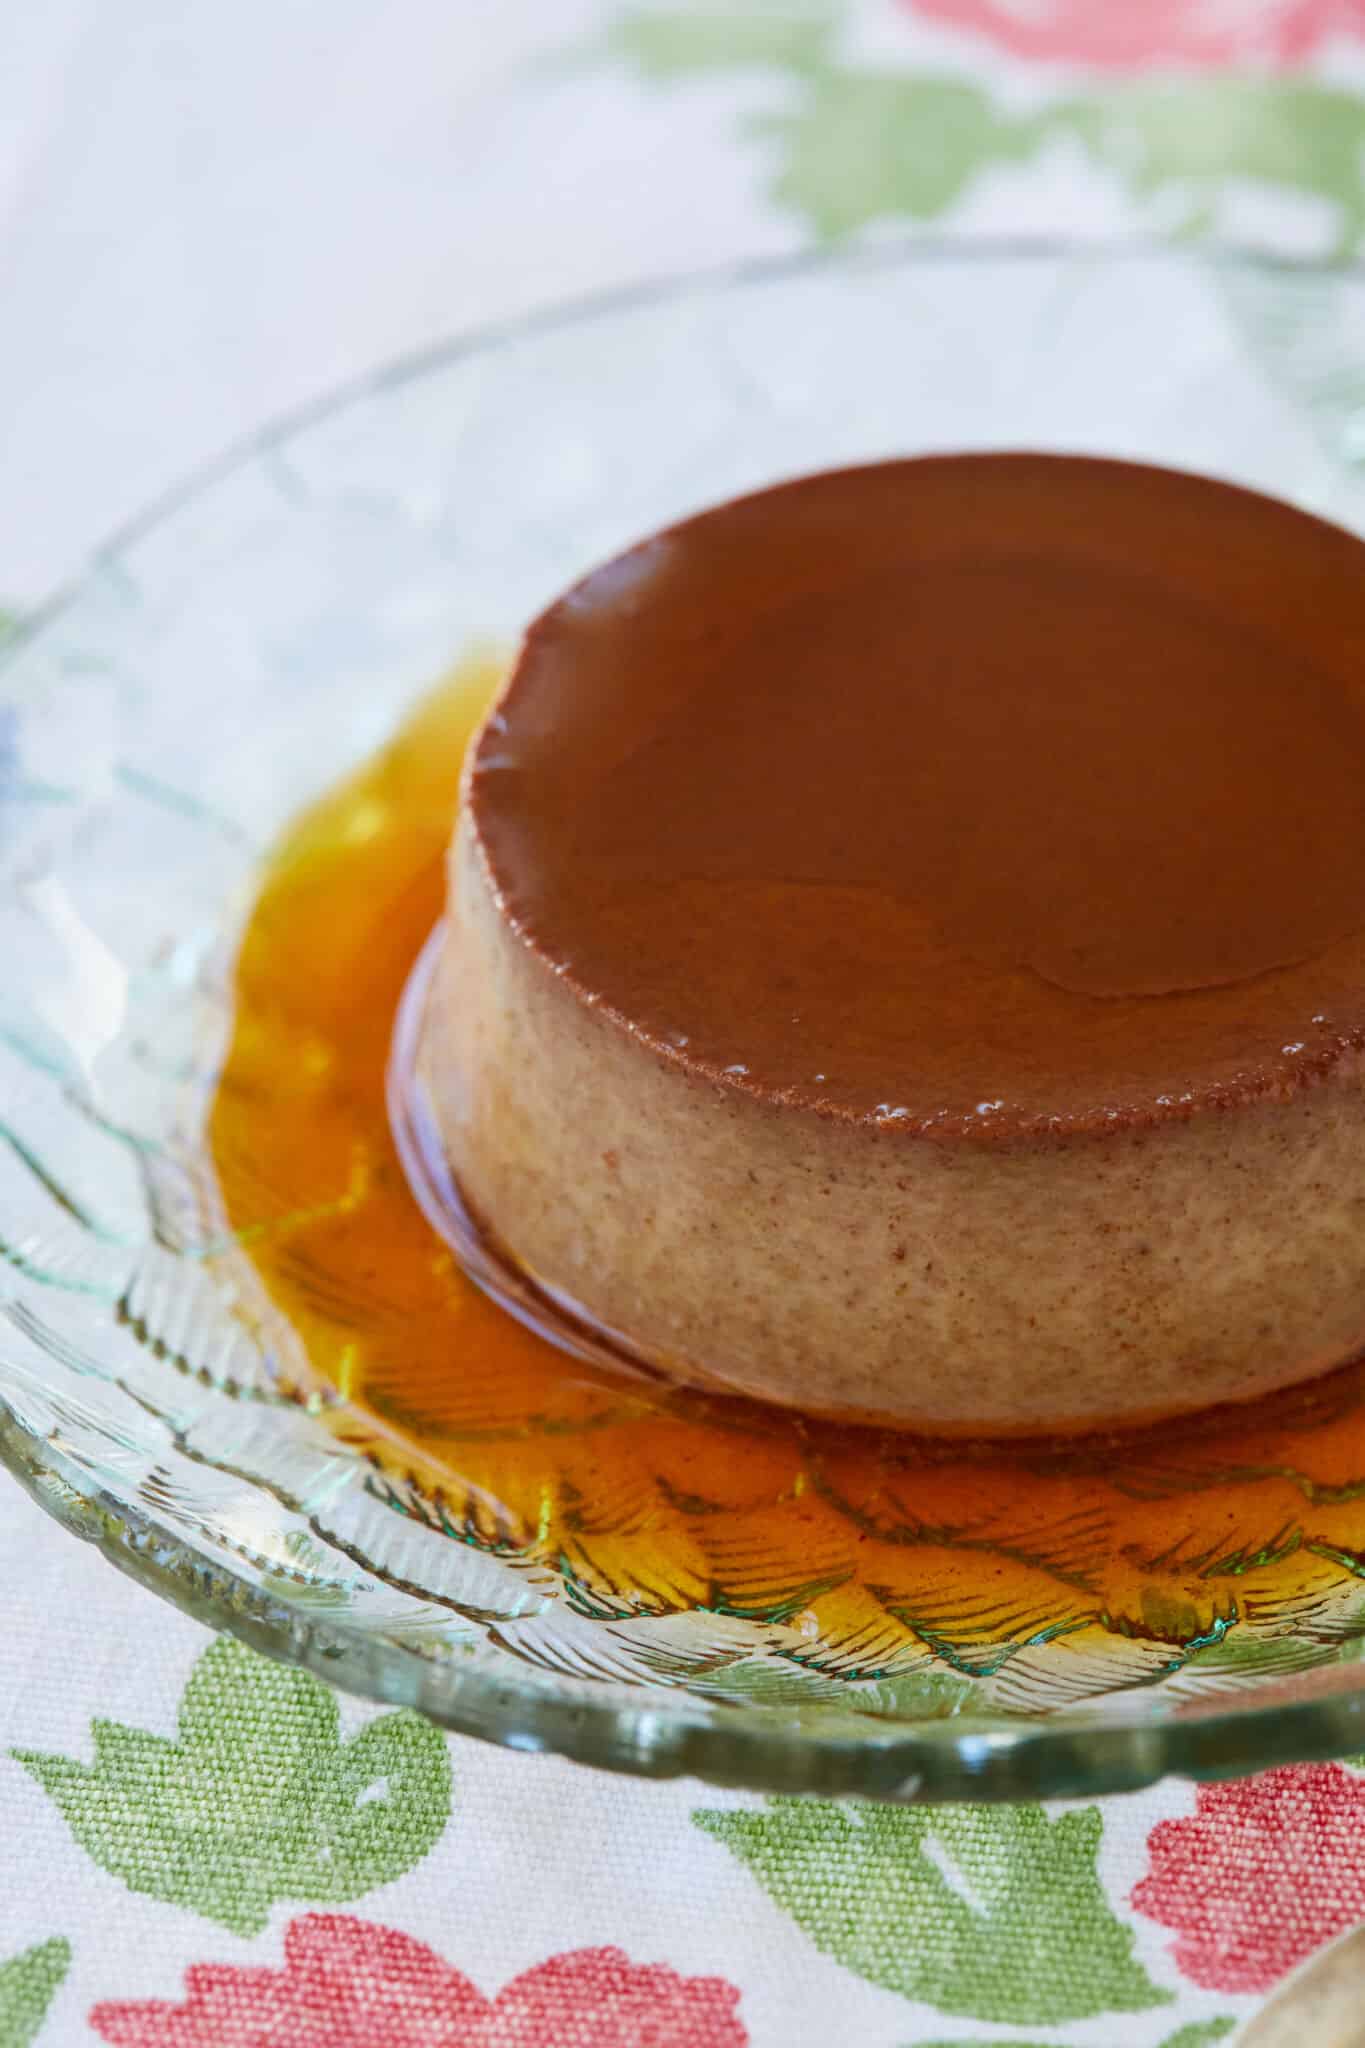 A close-up shot at the chocolate Crème Caramel served on a glass dessert plate, with silky and tender custard topped with decadent sweet caramel. 